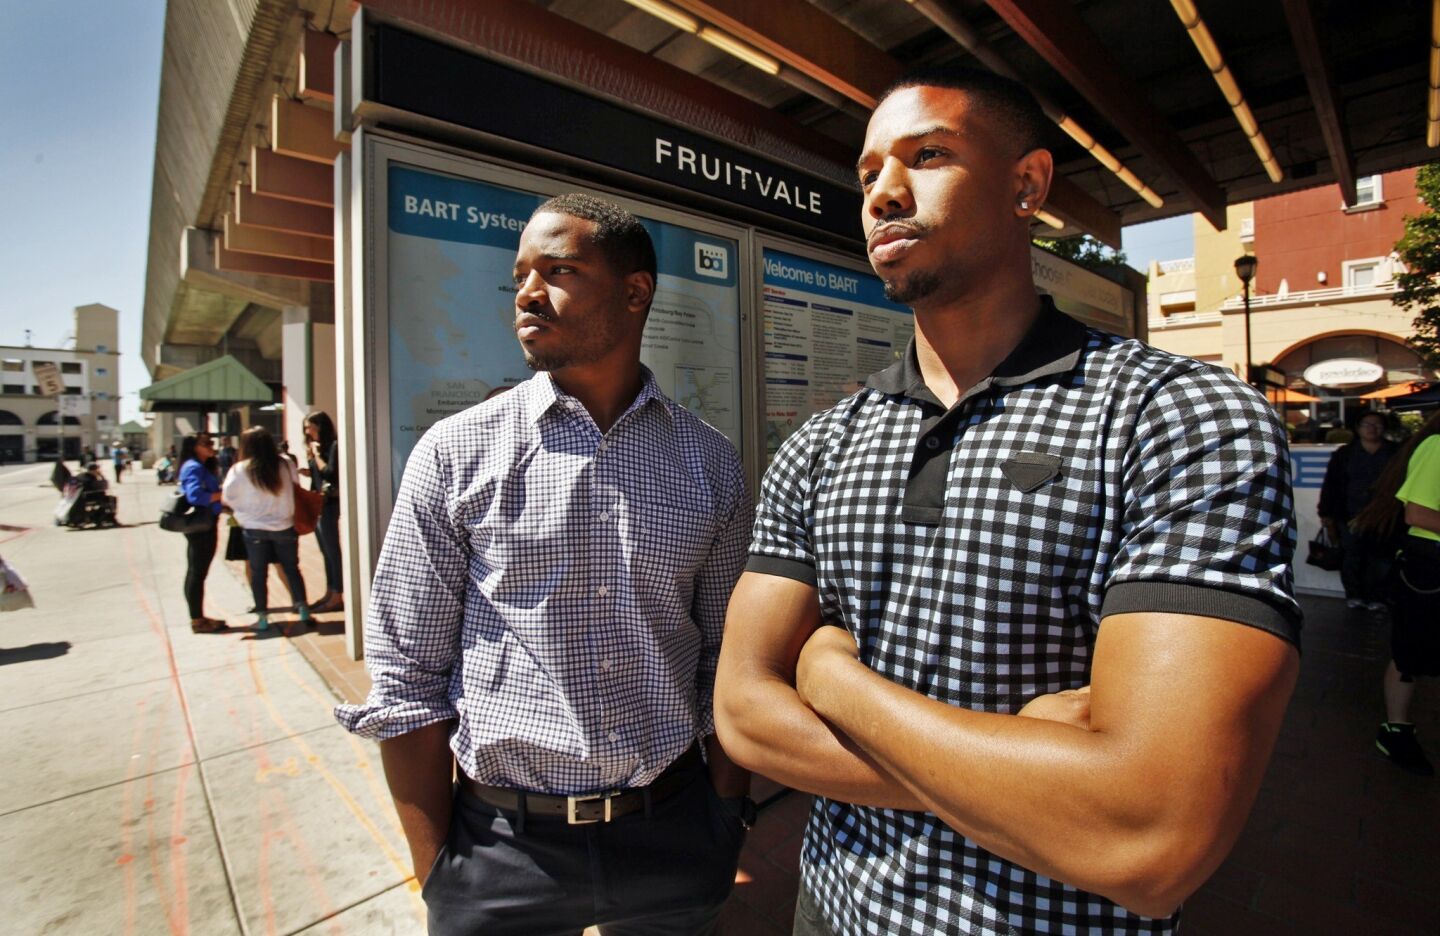 "Fruitvale Station" director Ryan Coogler, left, and actor Michael B. Jordan, right, at the BART Fruitvale station in Oakland hours before attending the film's premiere on June 20, 2013. Scenes of "Fruitvale Station" were shot in the same location where Oscar Grant was shot by a BART police officer in 2009. Four years later, Coogler has made a film about the case.